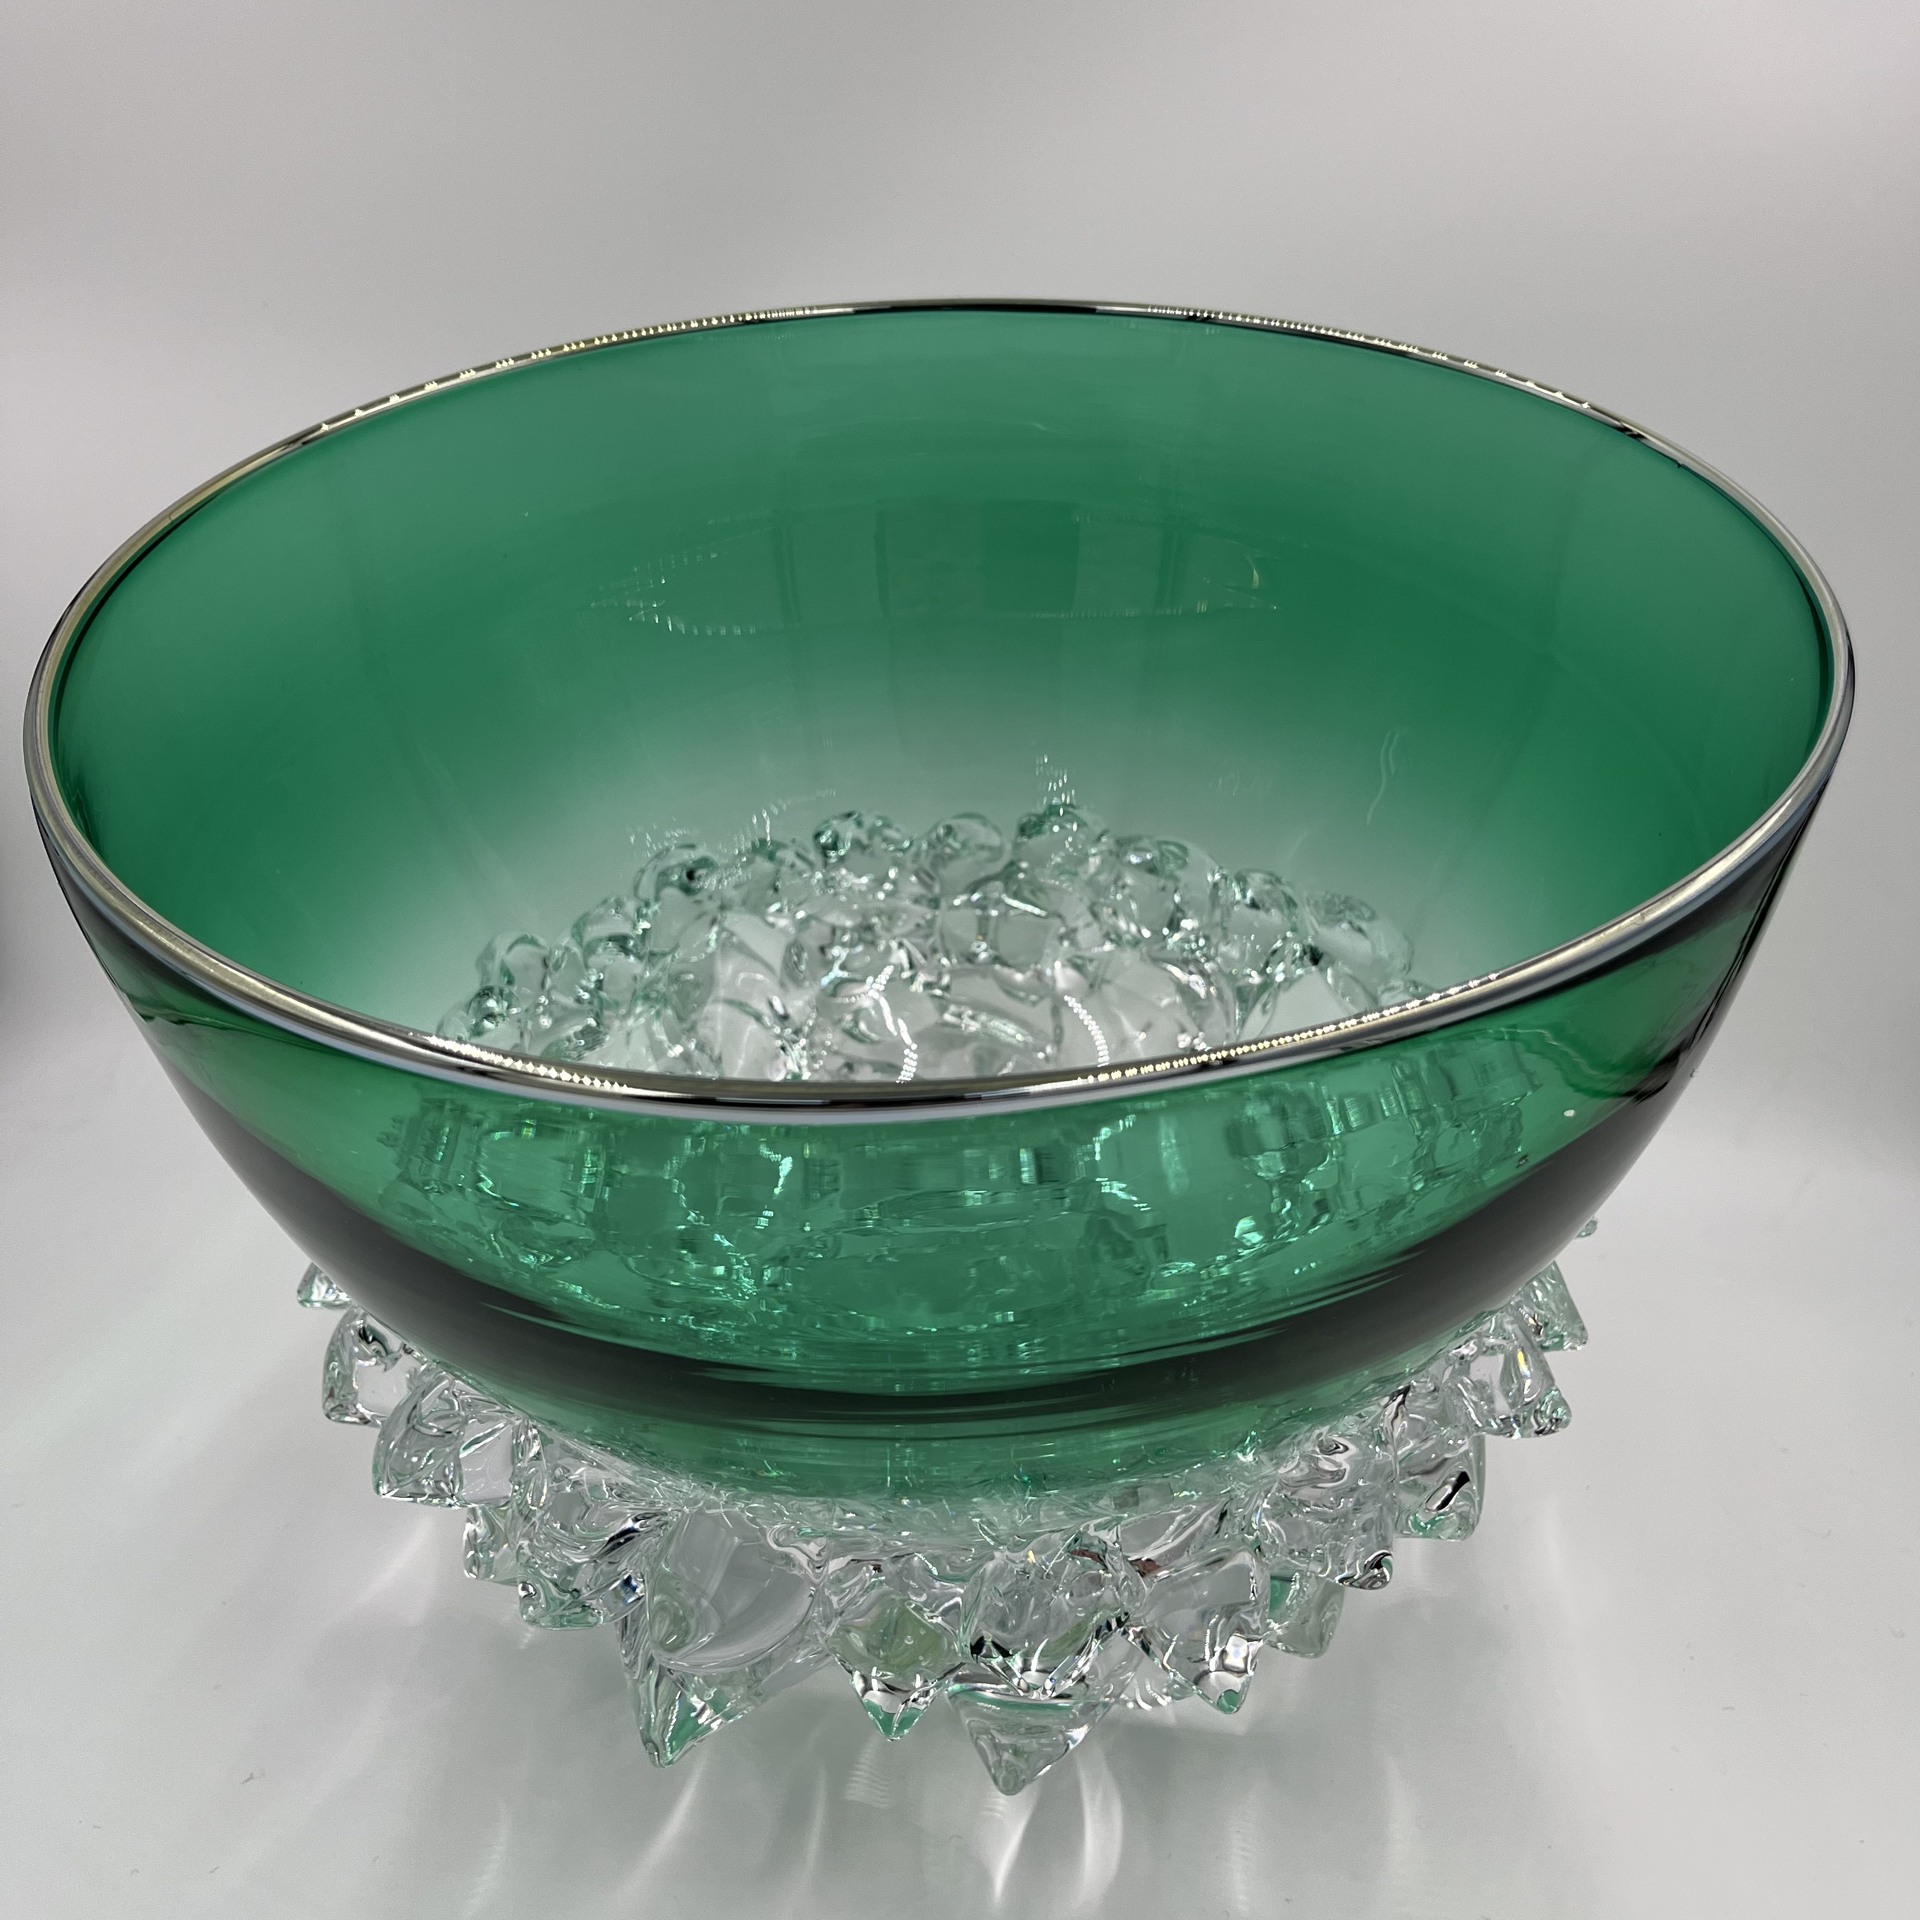 Emerald Green Thorn Vessel by Andrew Madvin